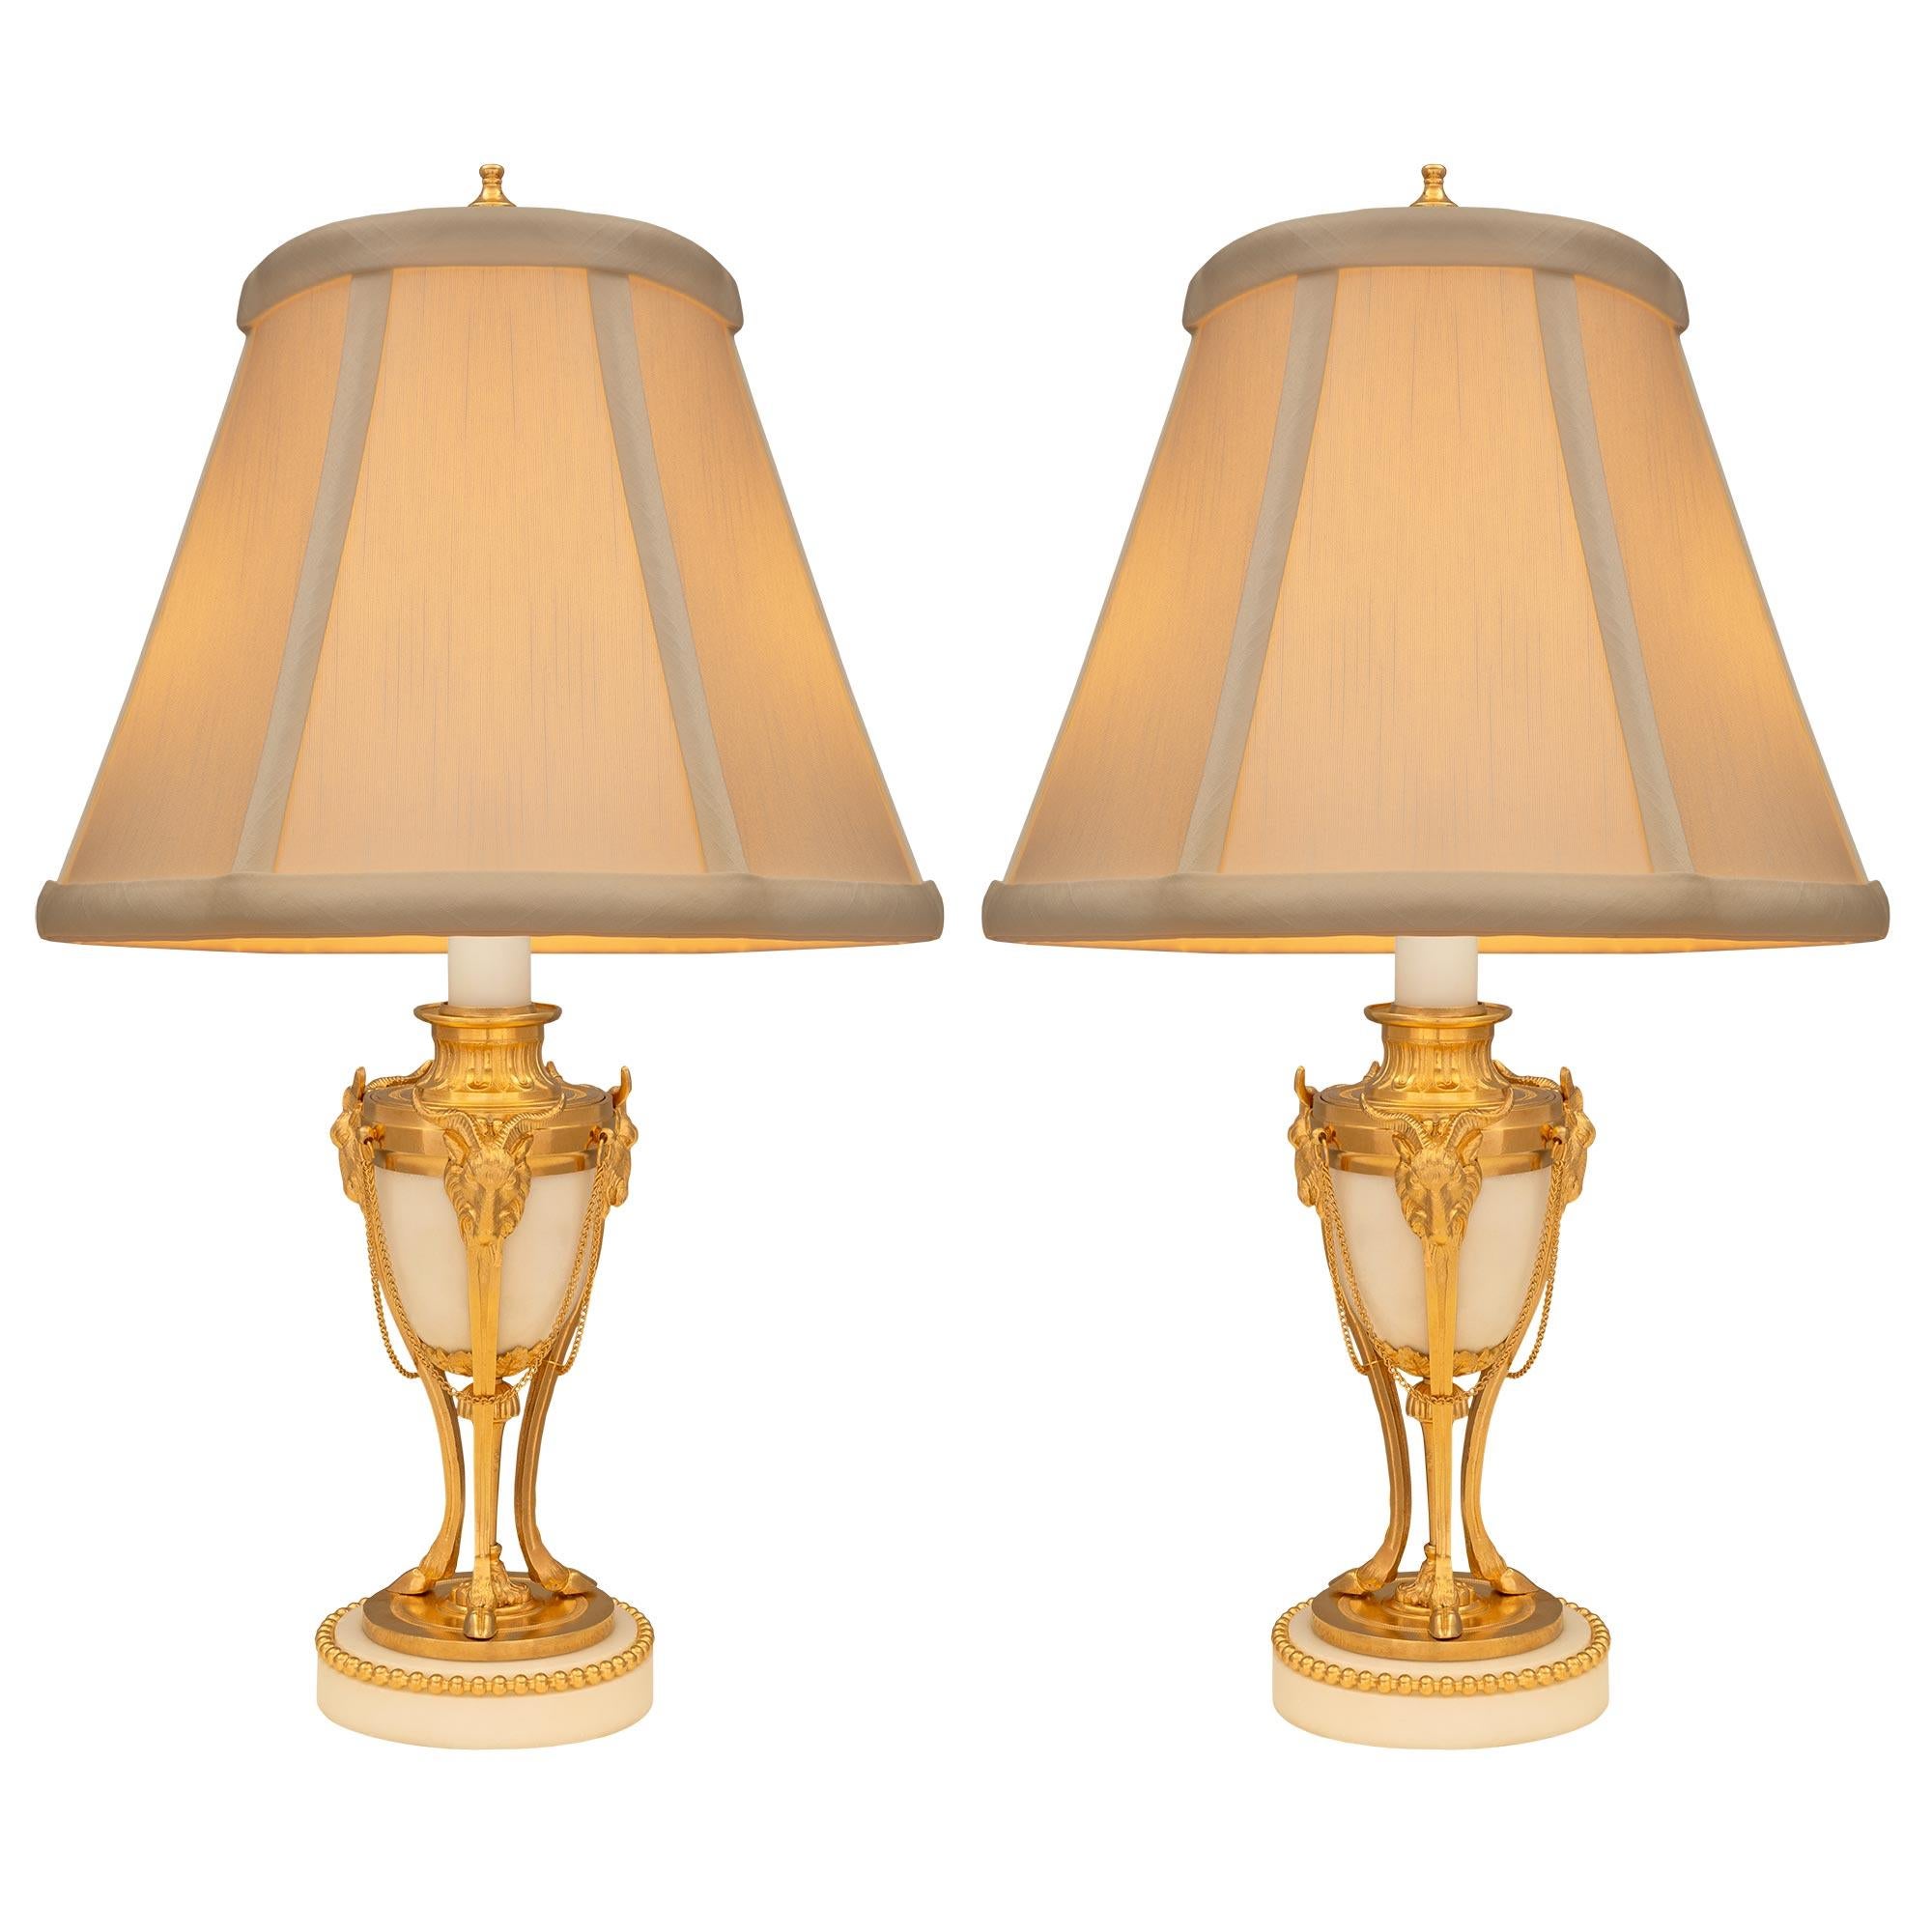 An elegant pair of French 19th century Louis XVI st. white Carrara marble and ormolu lamps. Each lamp is raised by a circular white Carrara marble base with a fine fitted wrap around beaded ormolu band. Three elegantly curved supports with handsome